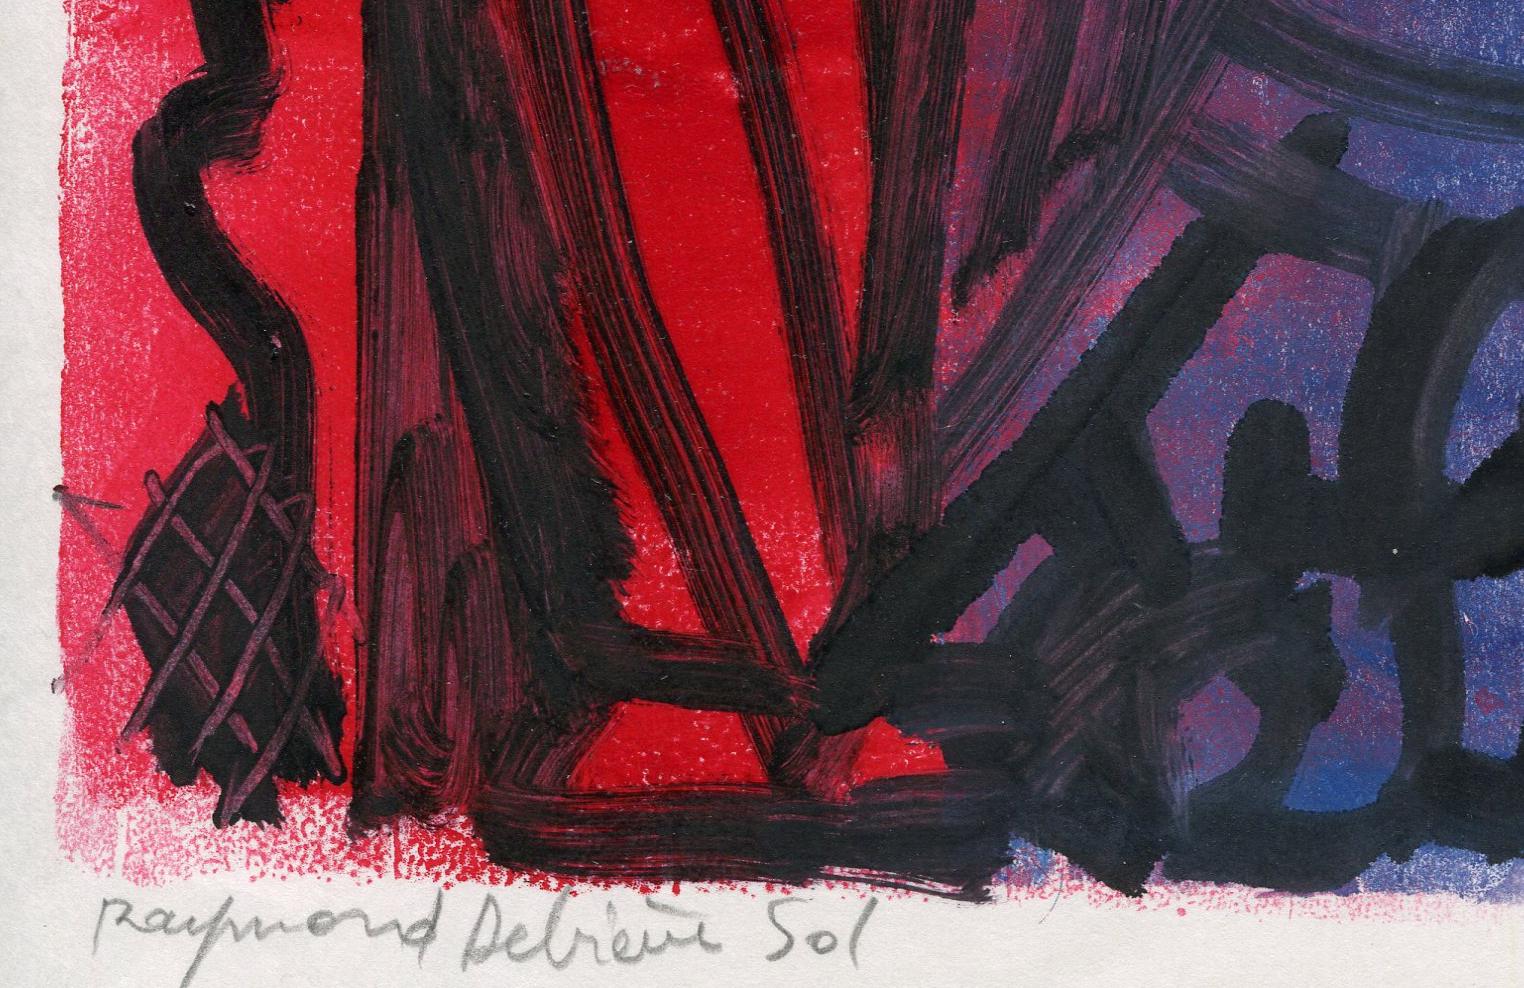 Red and blue owl - Raymond Debiève, unique piece, monotype - Painting by Raymond Debieve